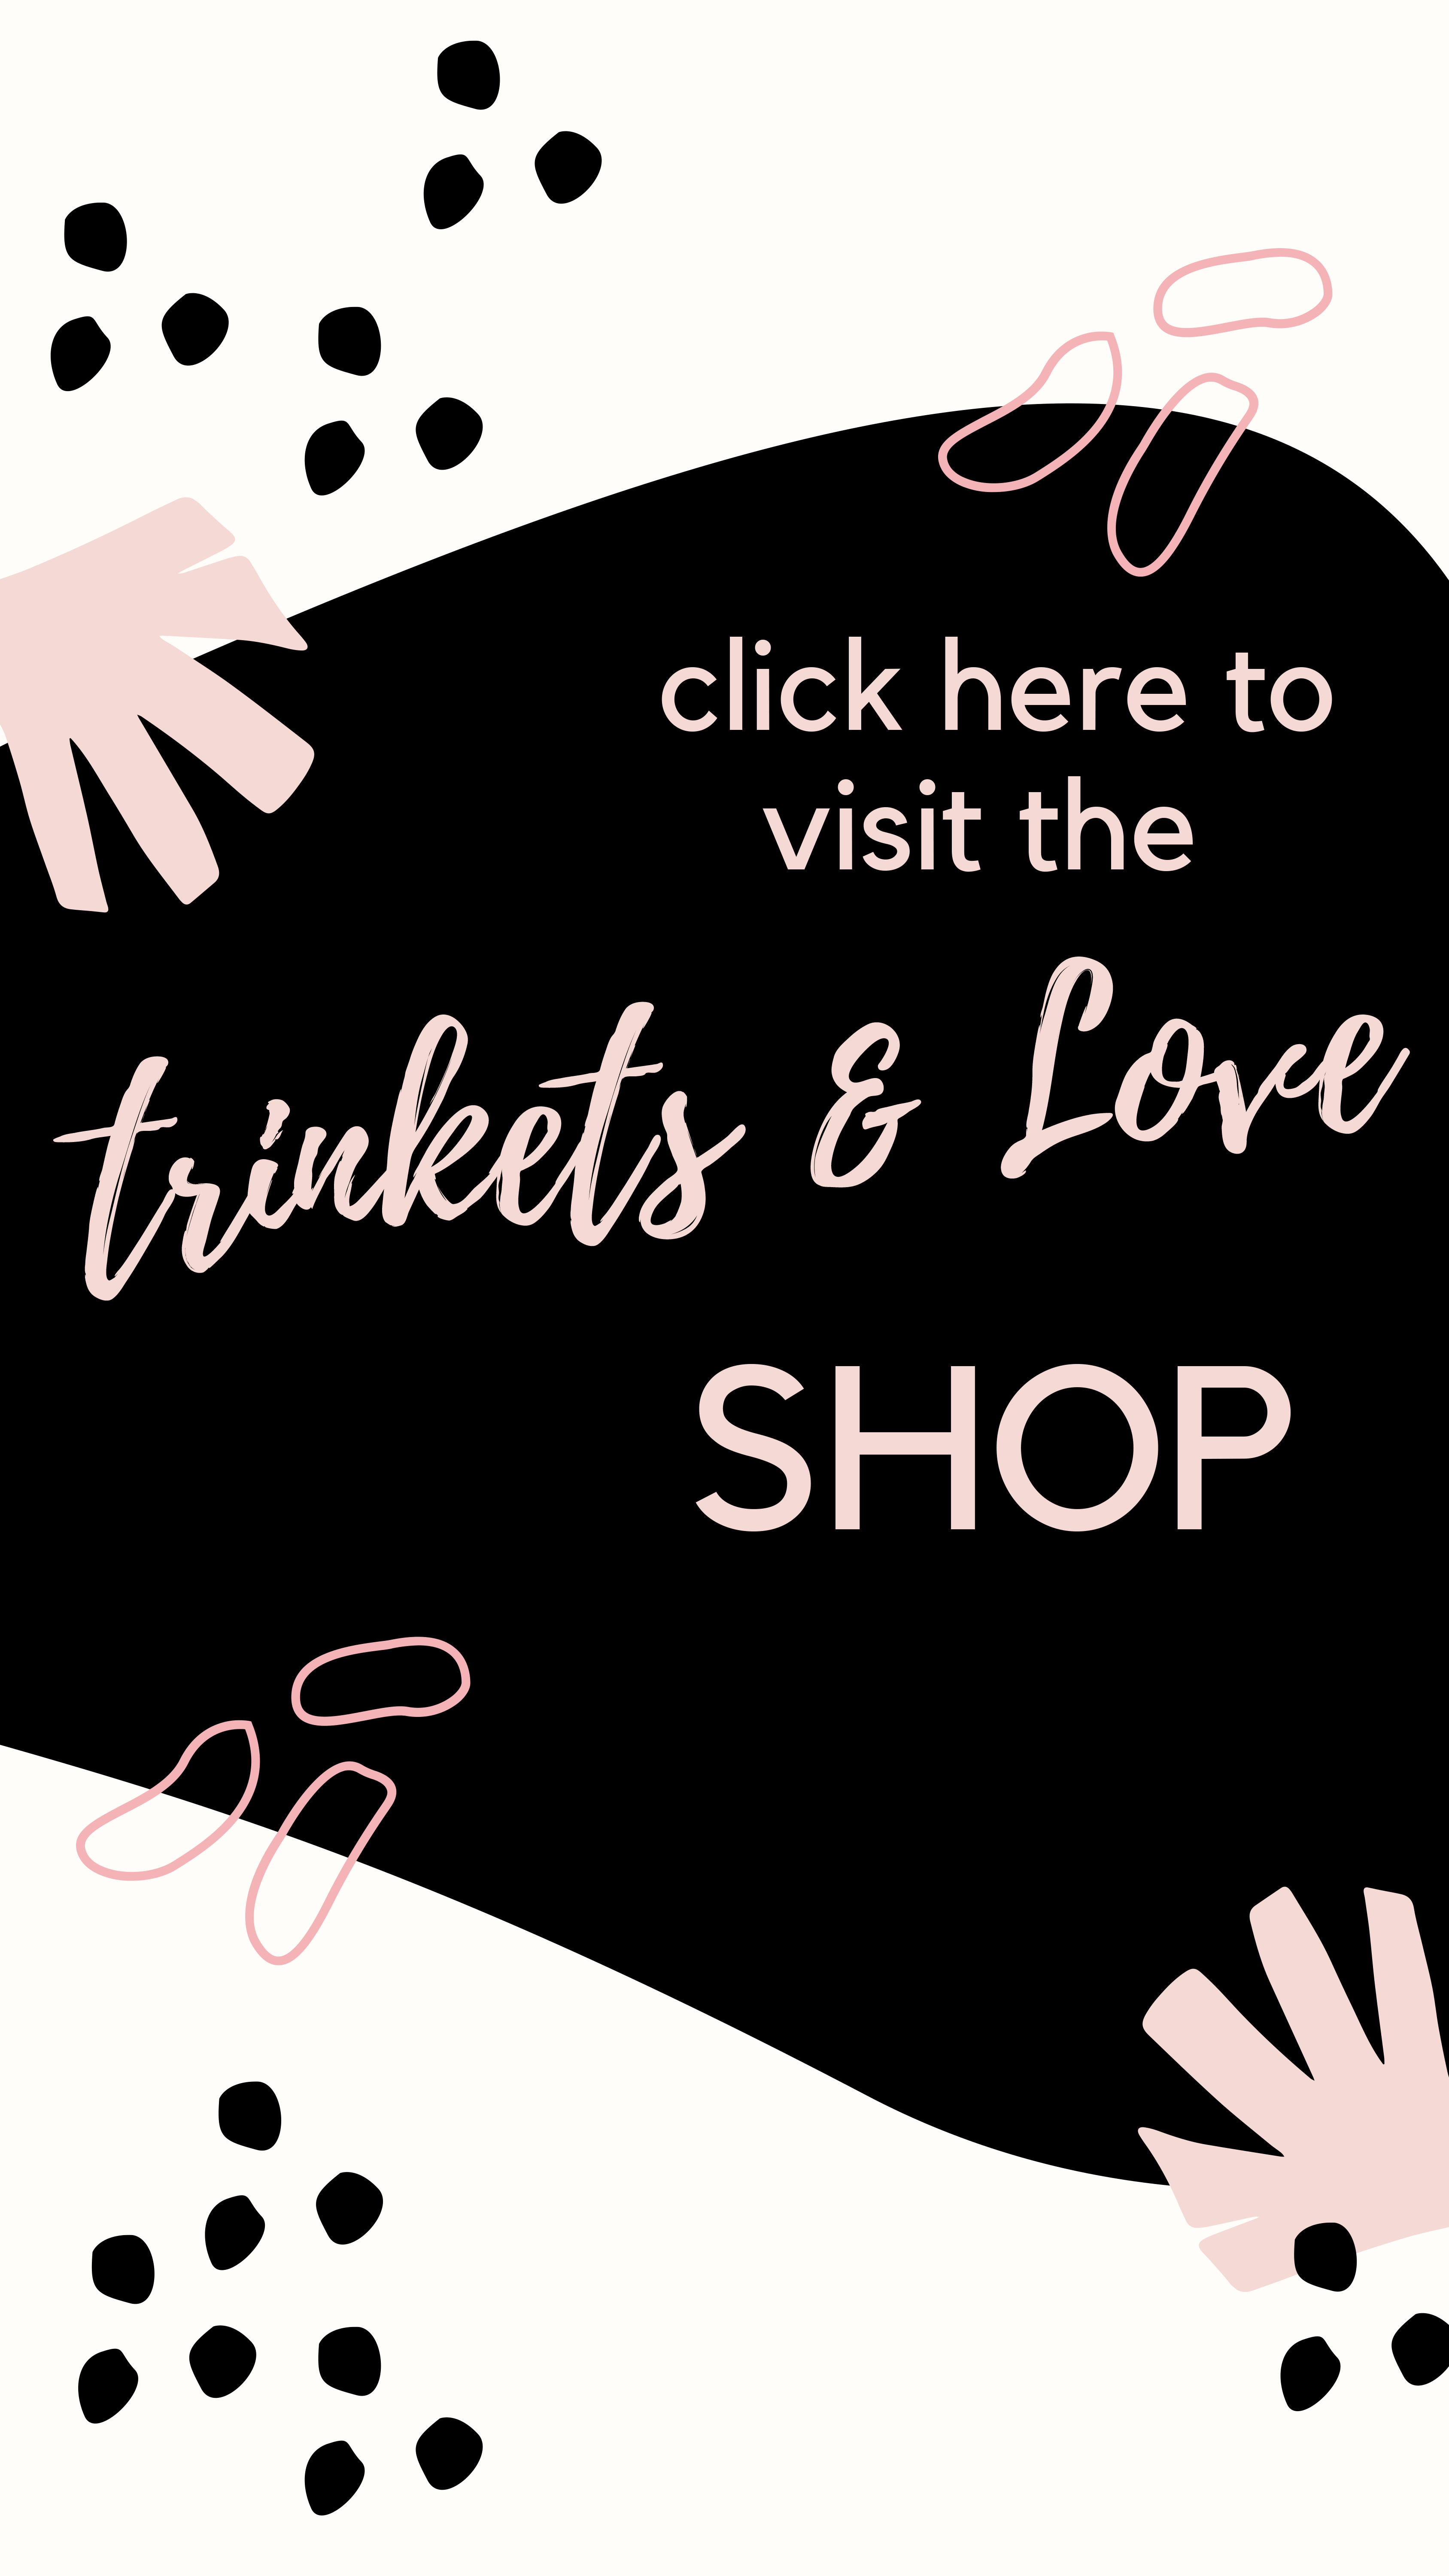 Trinkets and Love - Shop banner